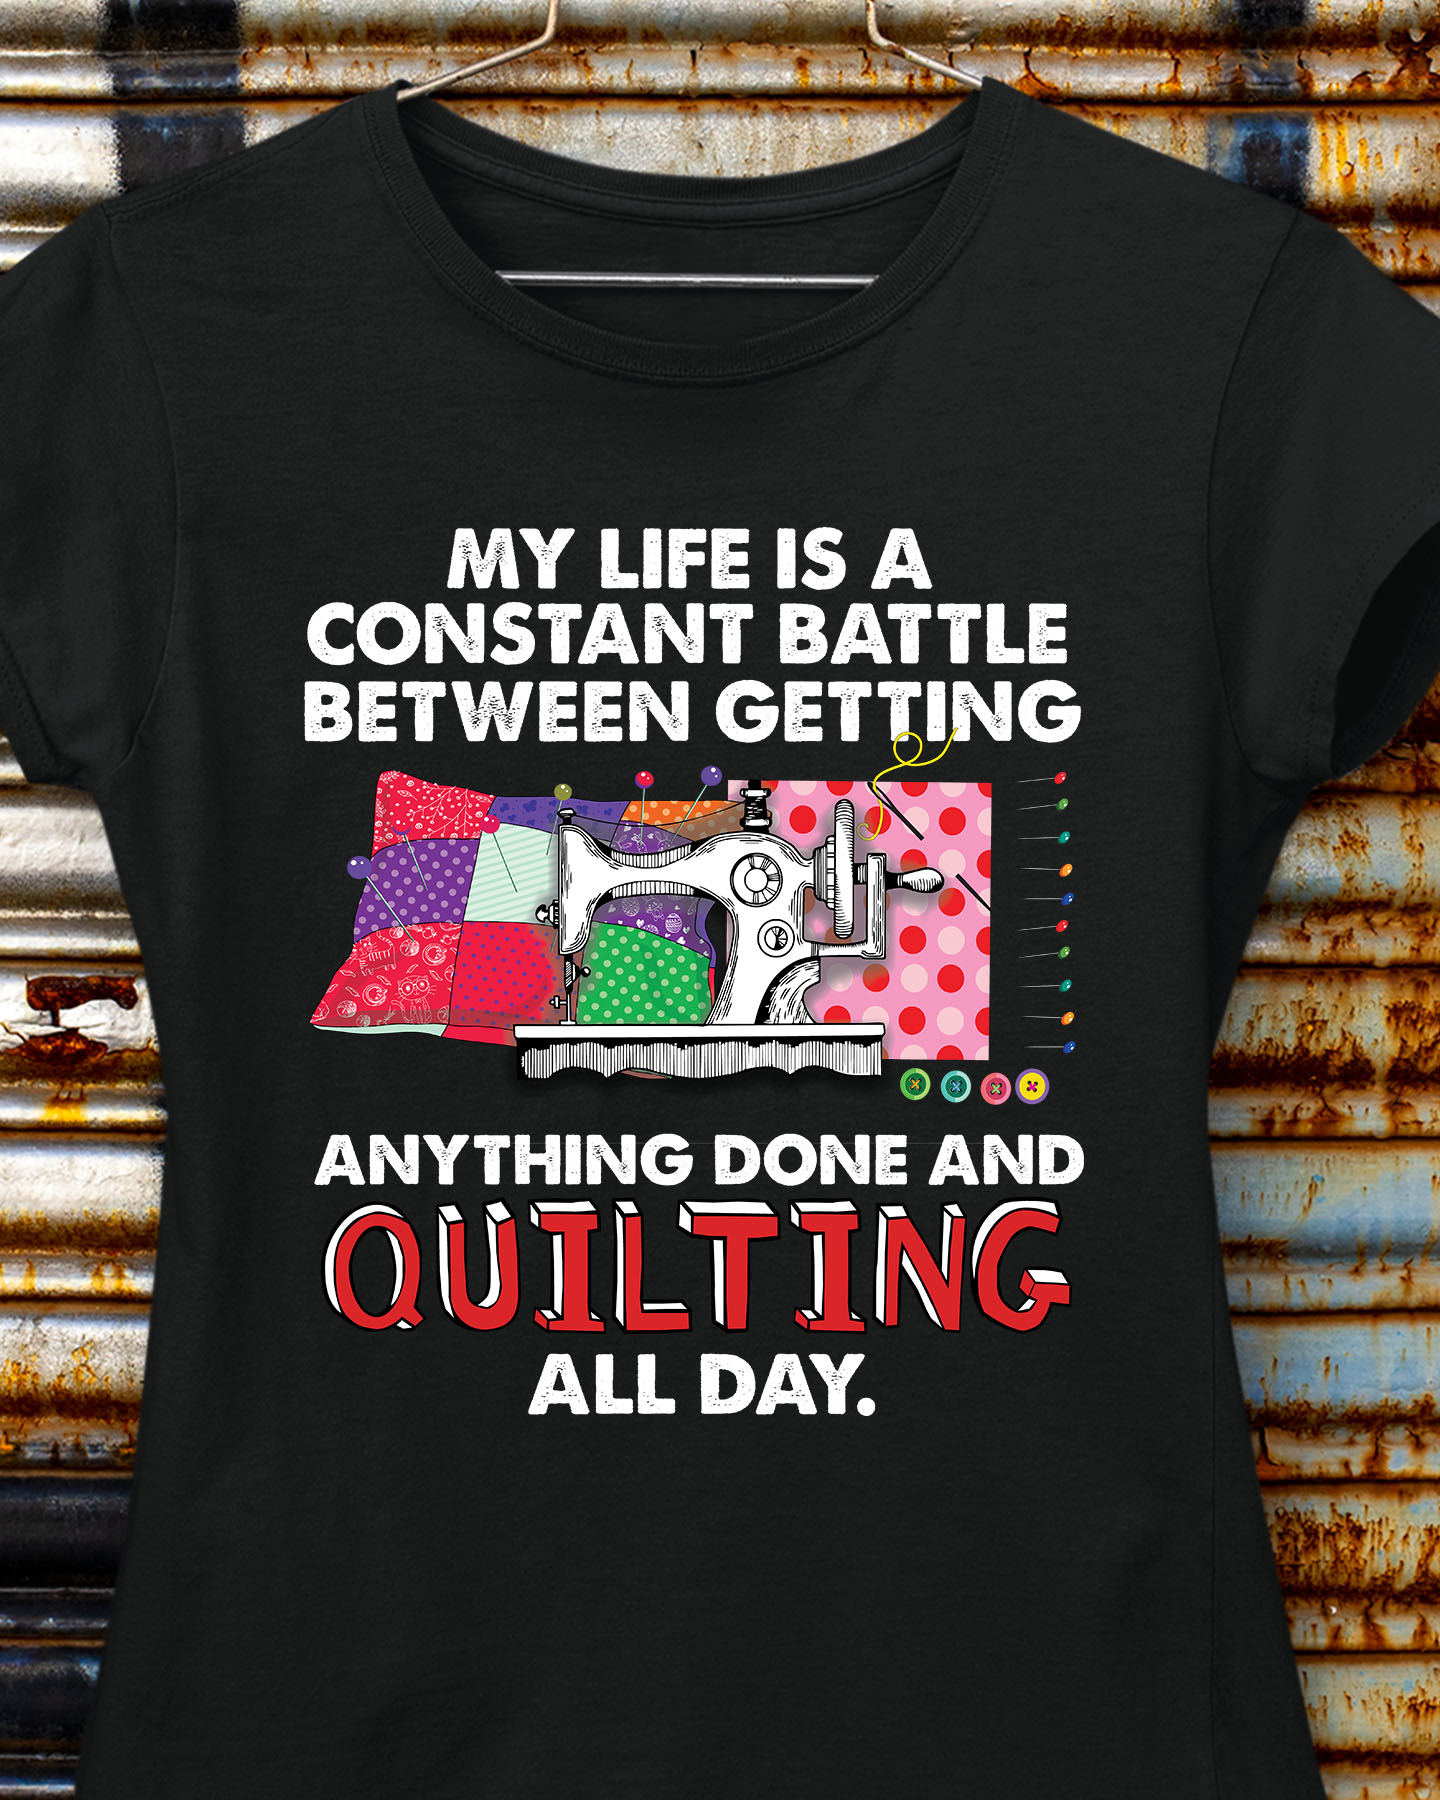 My life is a constant battle between getting anything done and quilting allday